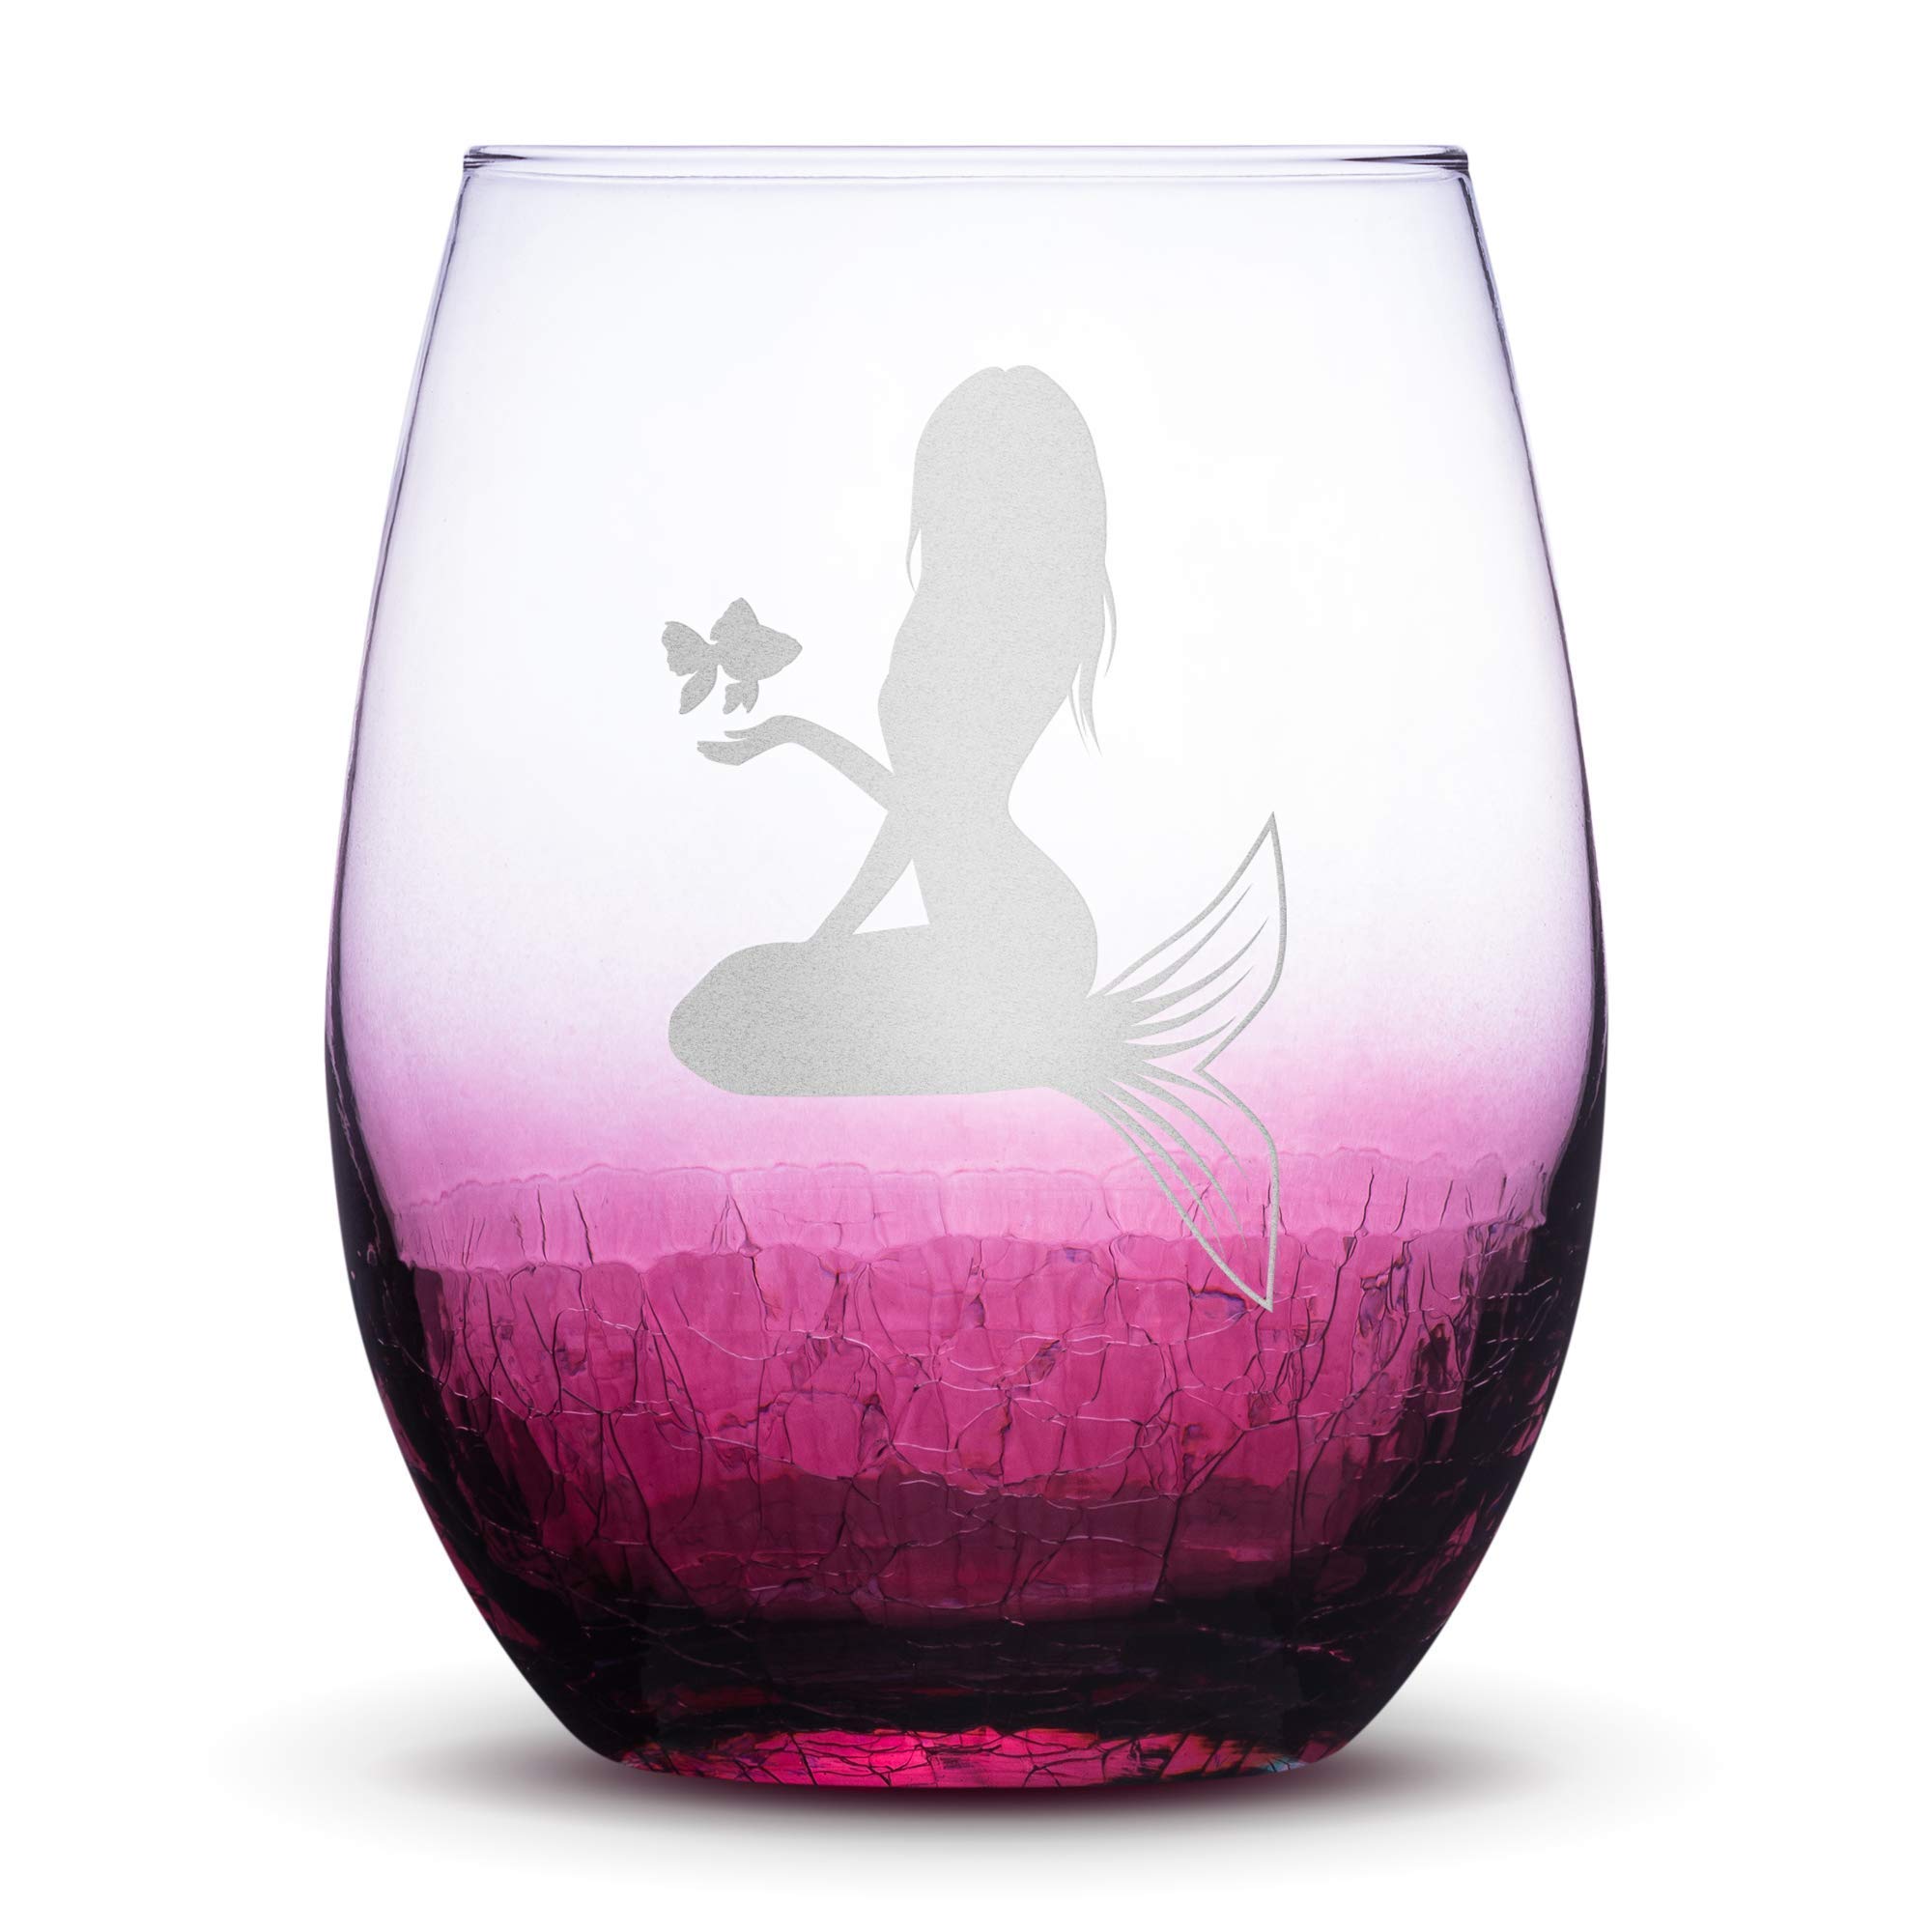 Integrity Bottles, Mermaid Design #5, (Single) Stemless Wine Glass, Handmade, Handblown, Hand Etched Gifts, Sand Carved, 19oz (Crackle Raspberry)